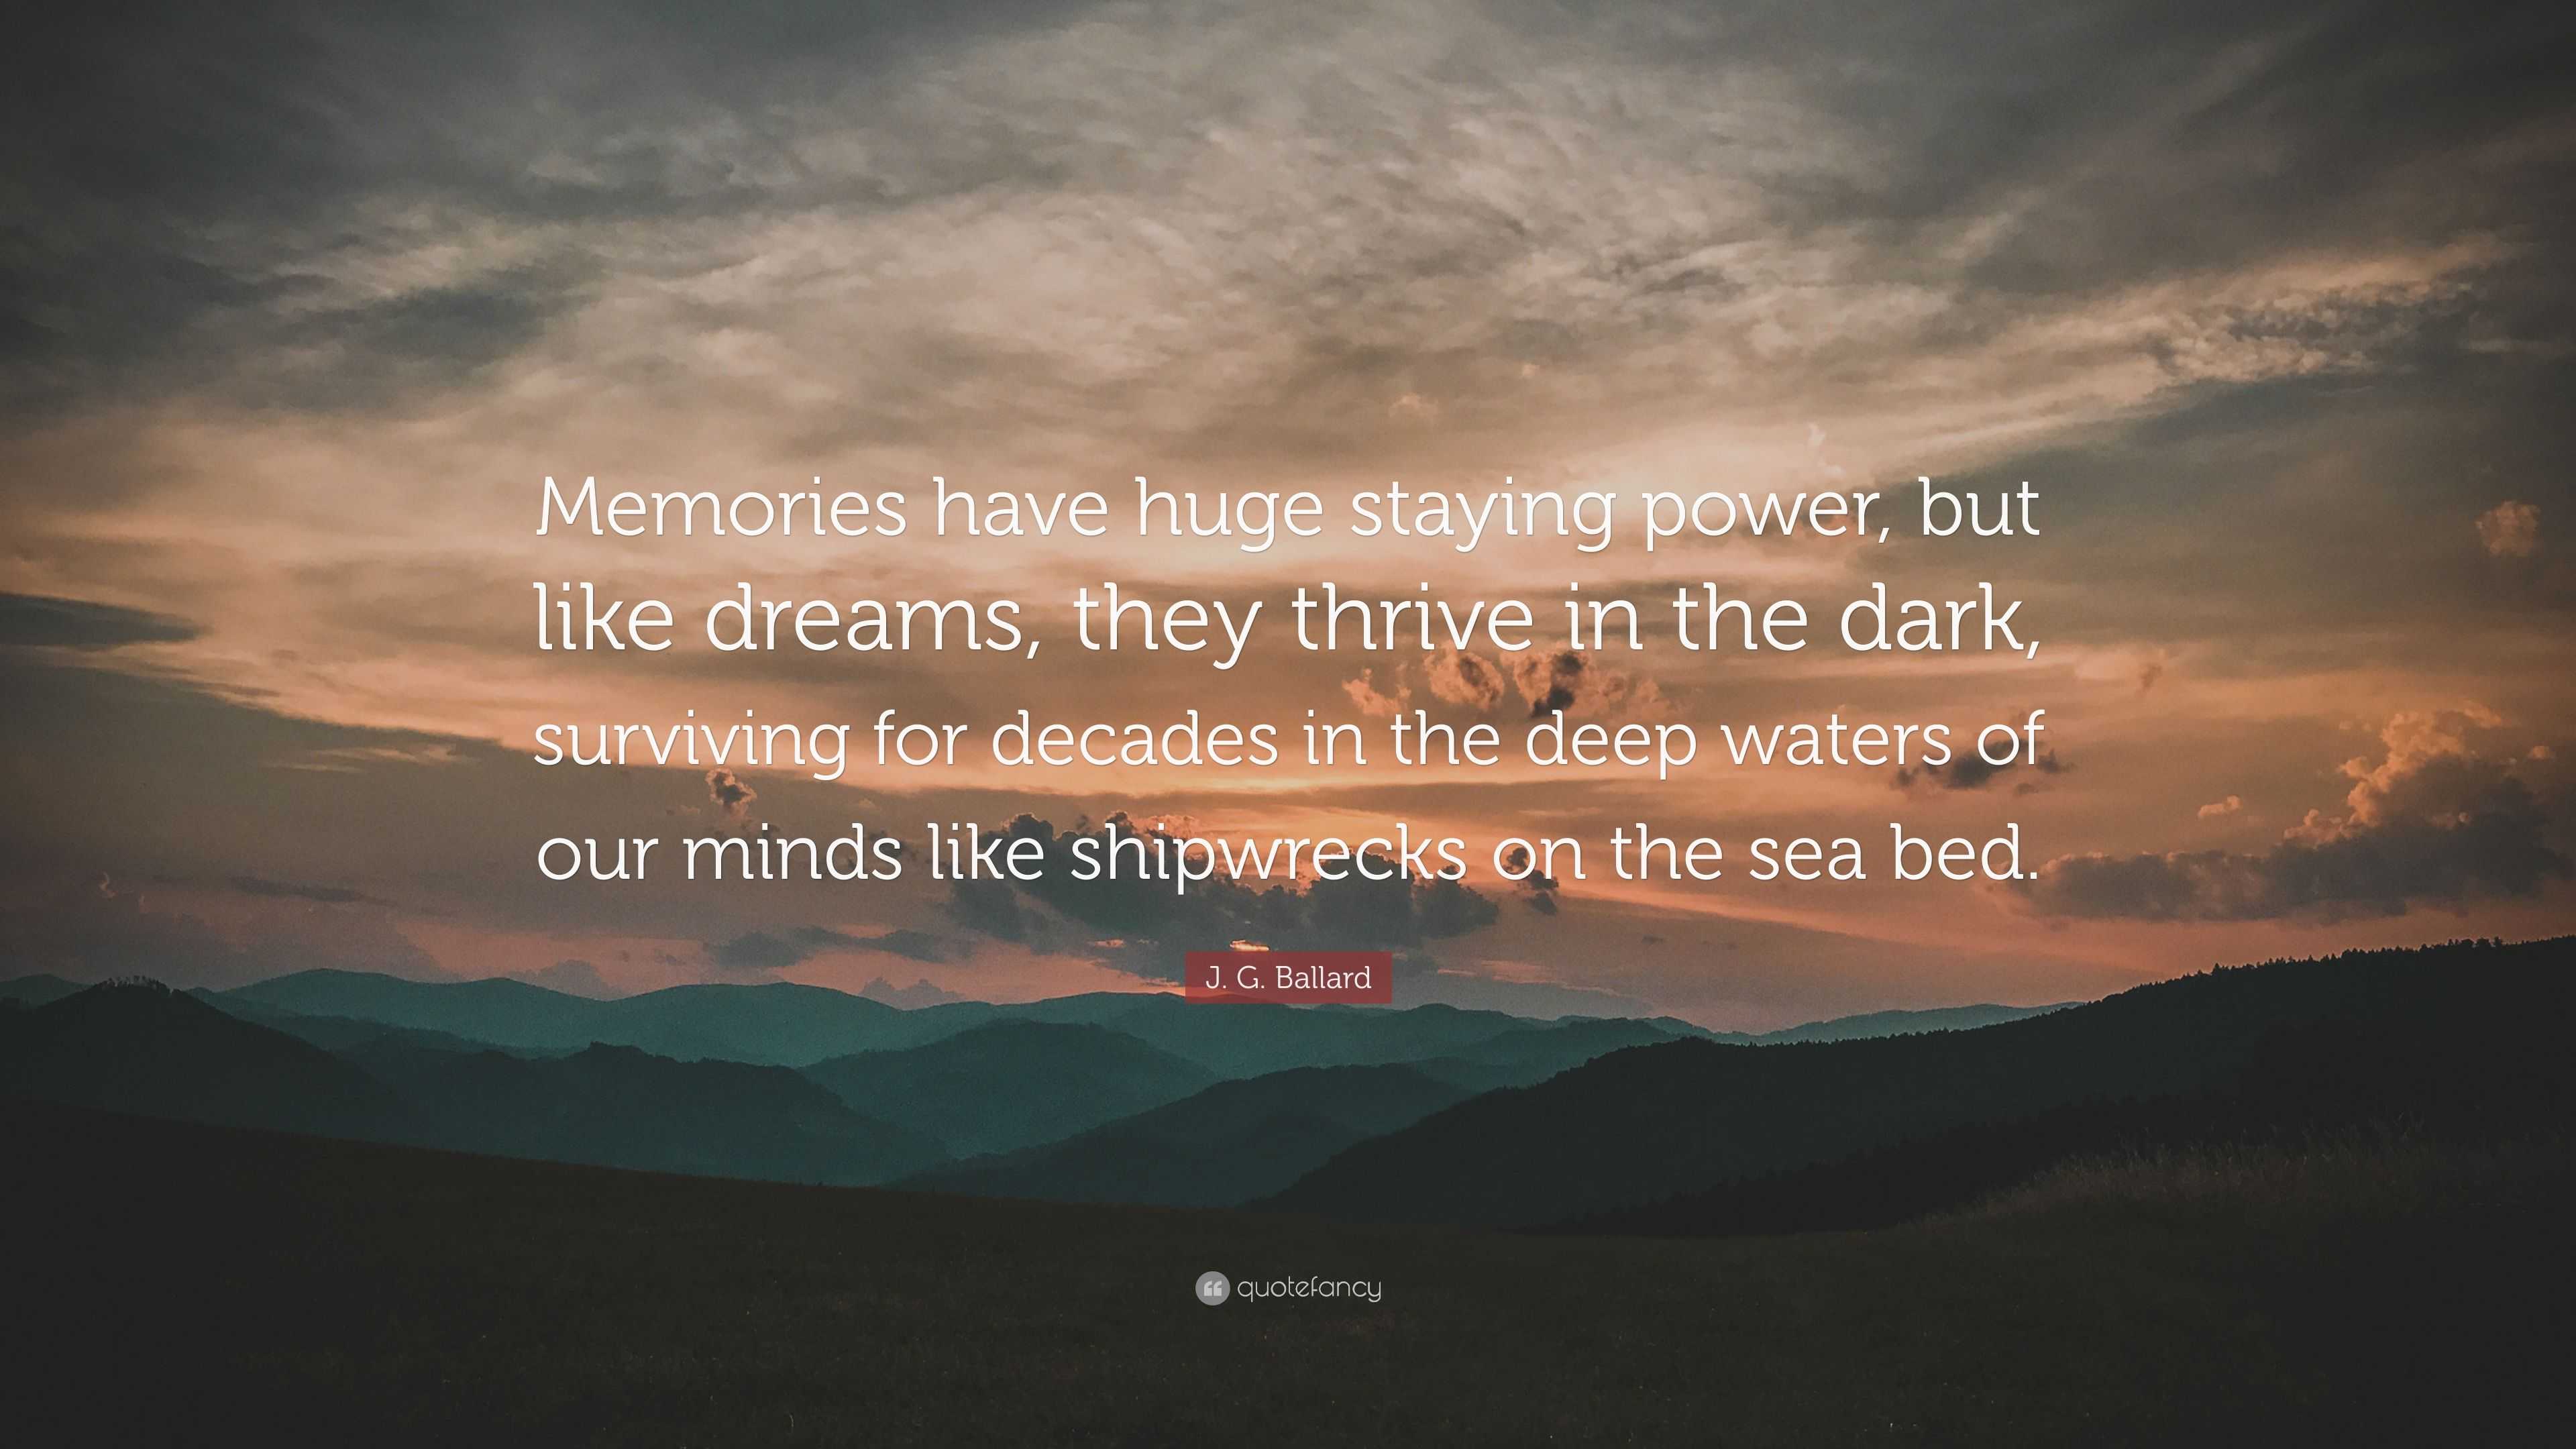 J. G. Ballard Quote: “Memories have huge staying power, but like dreams,  they thrive in the dark, surviving for decades in the deep waters of ”